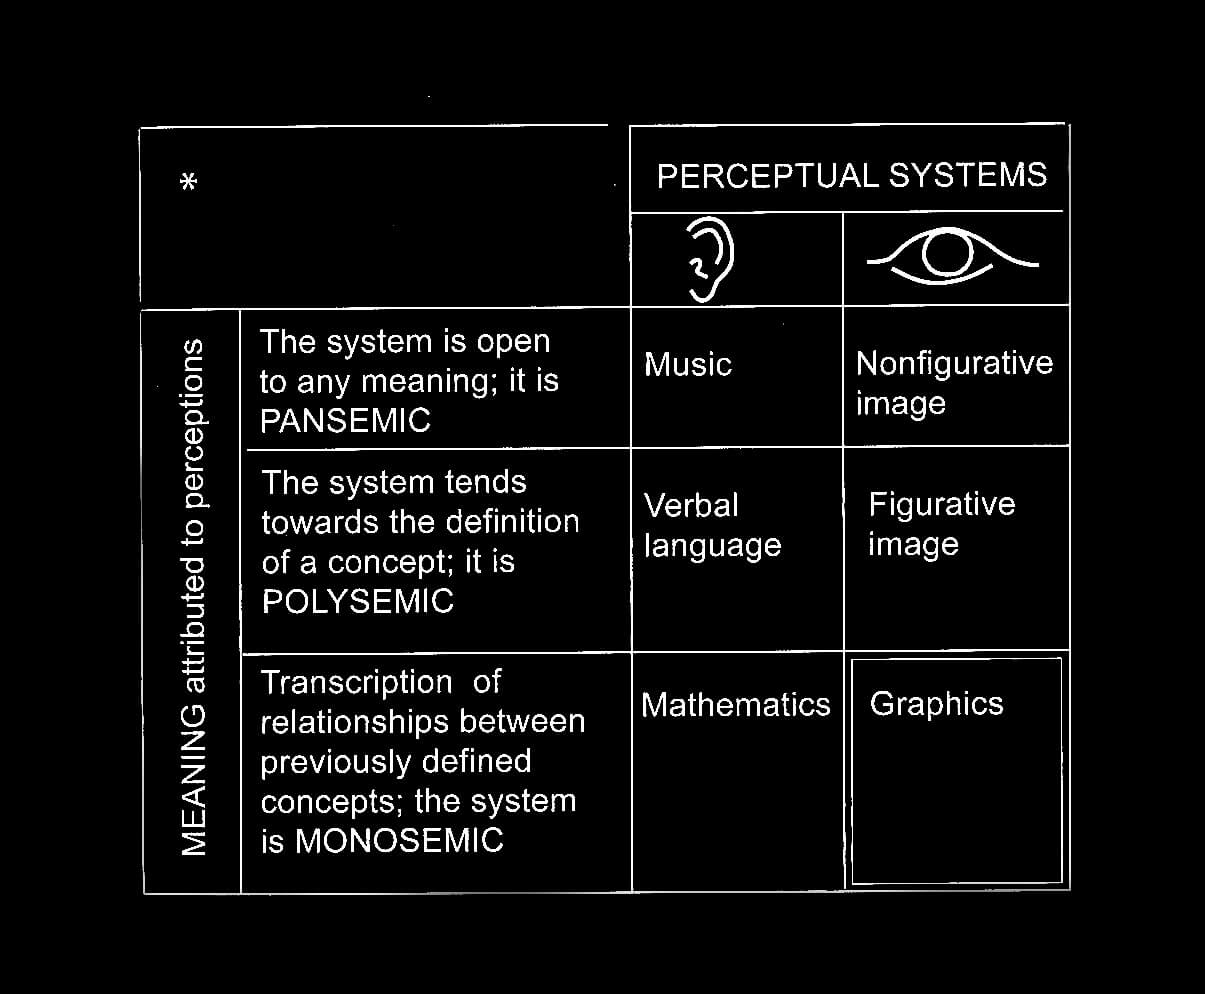 A diagram showing our perceptual systems and the meaning attributed to perceptions